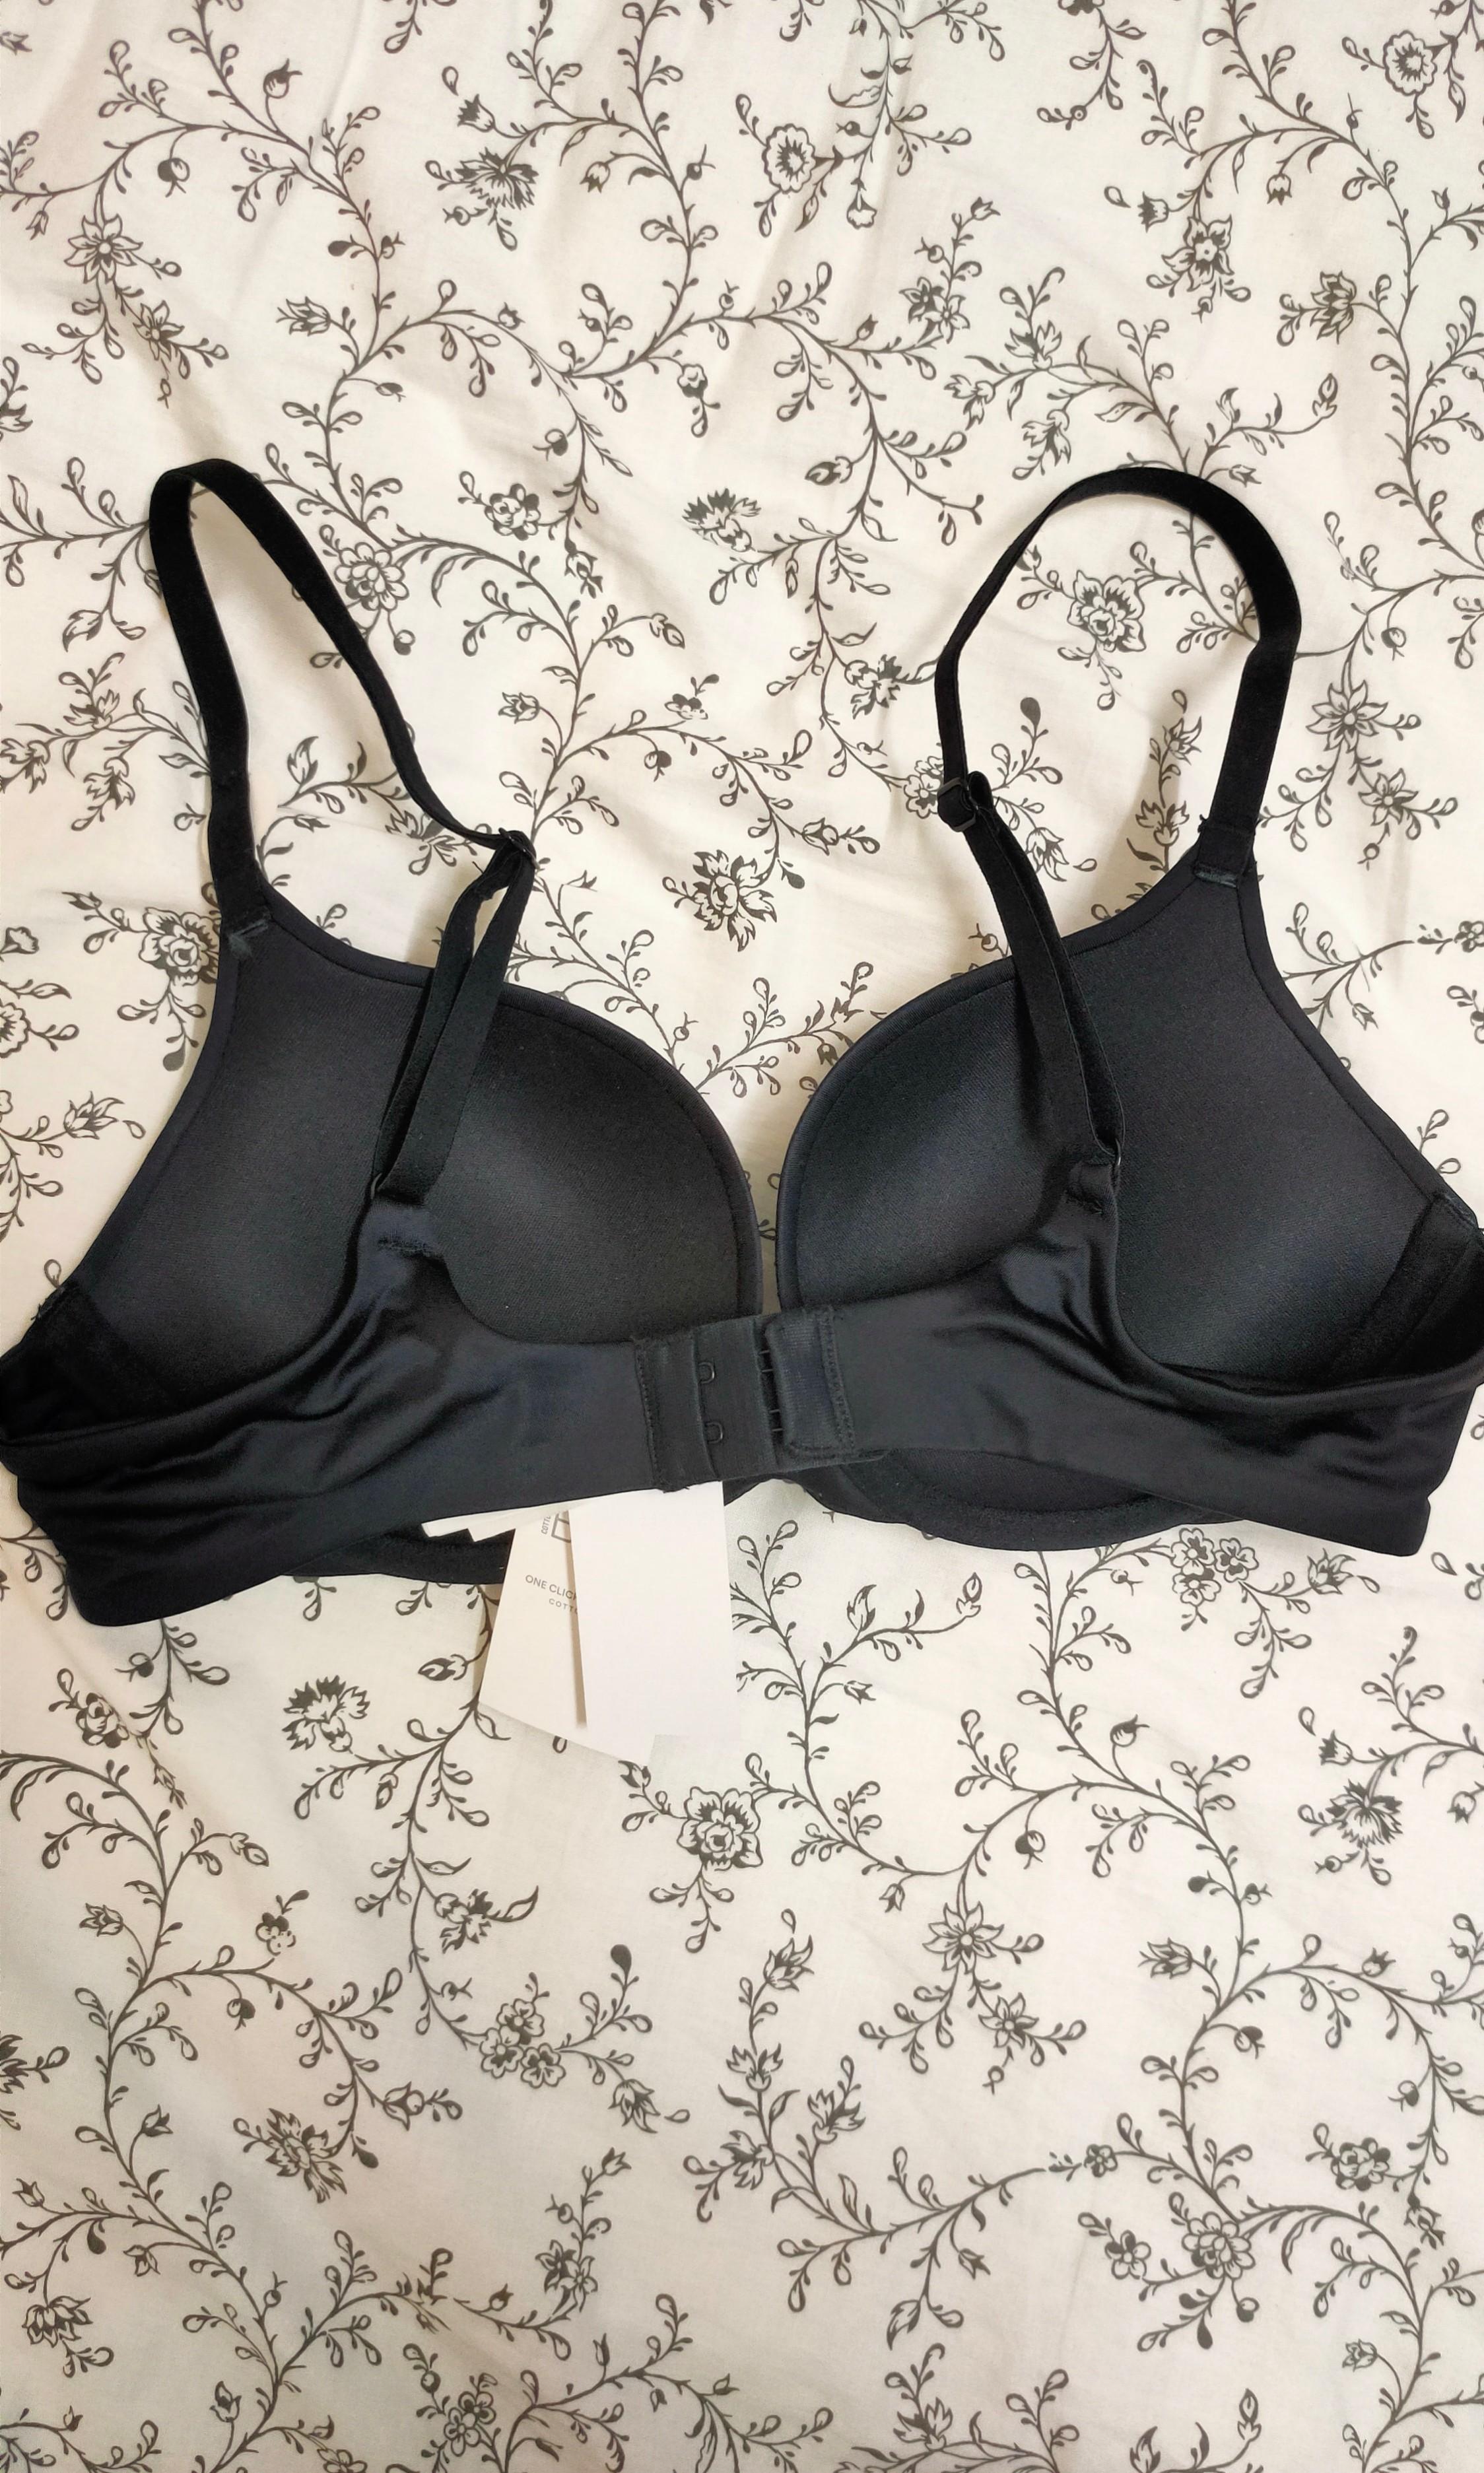 Ultimate Comfort Lace Strapless Push Up2 Bra